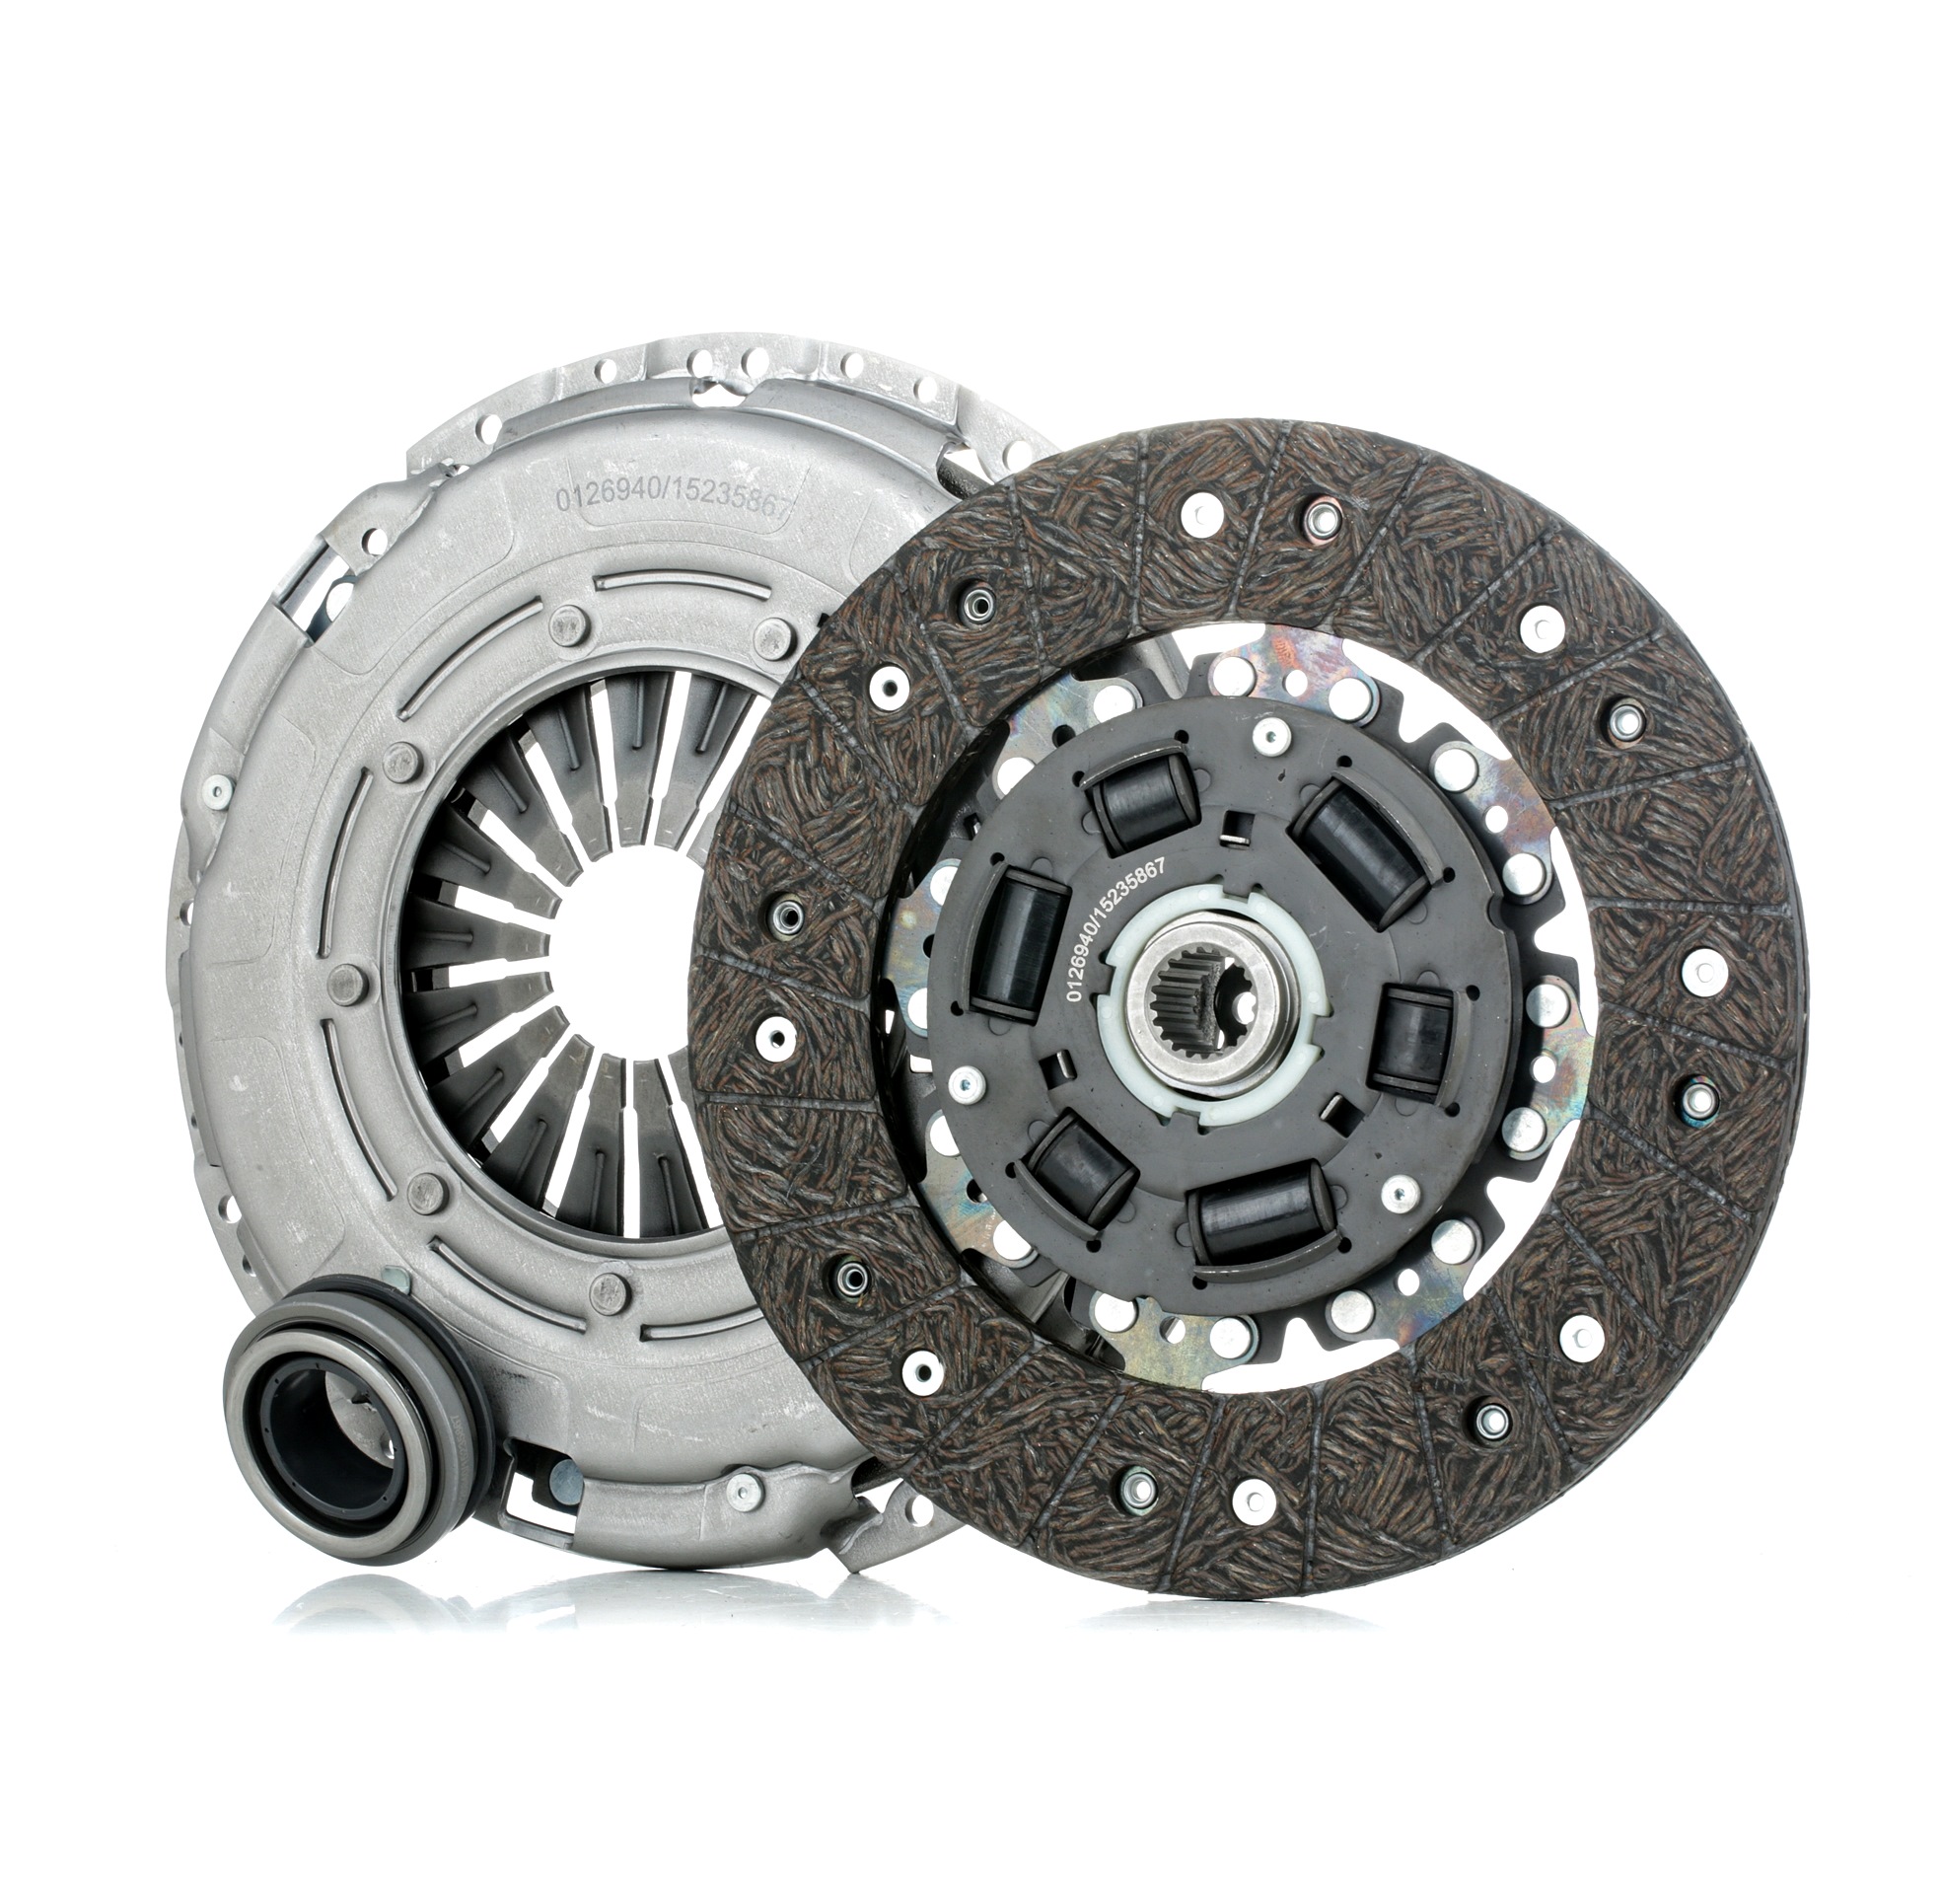 STARK SKCK-0100660 Clutch kit three-piece, with clutch pressure plate, with clutch release bearing, with clutch disc, 240mm